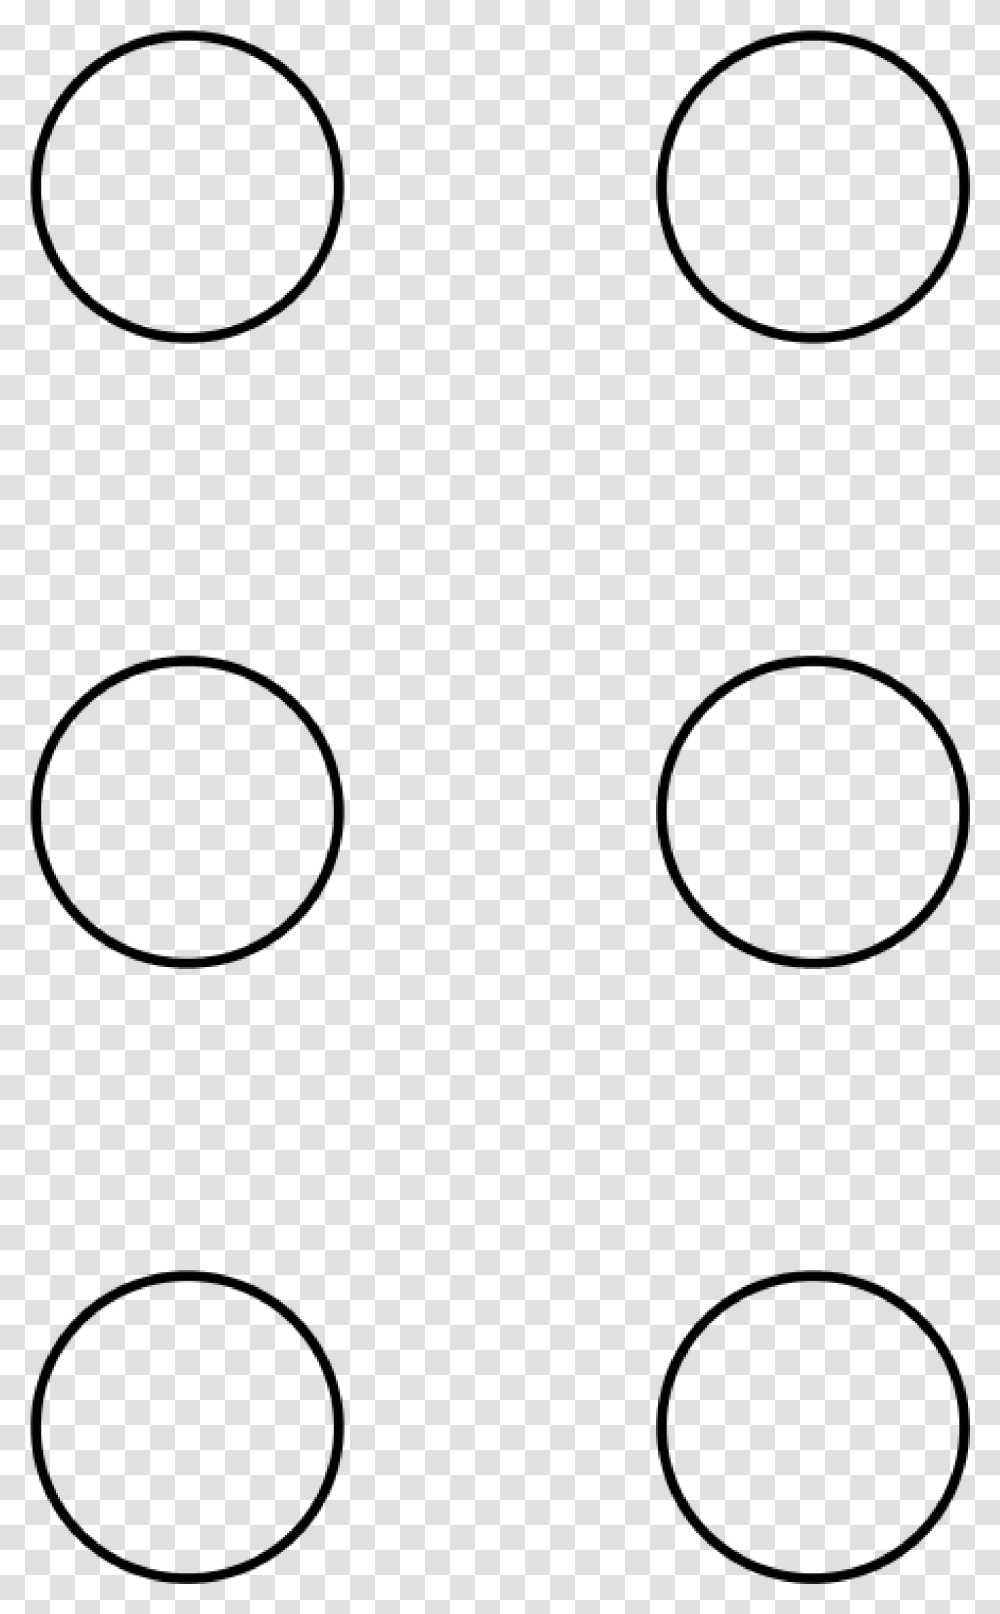 Circle Template Braille Symbol Main Image Empty Braille Cells, Cooktop, Indoors, Texture Transparent Png